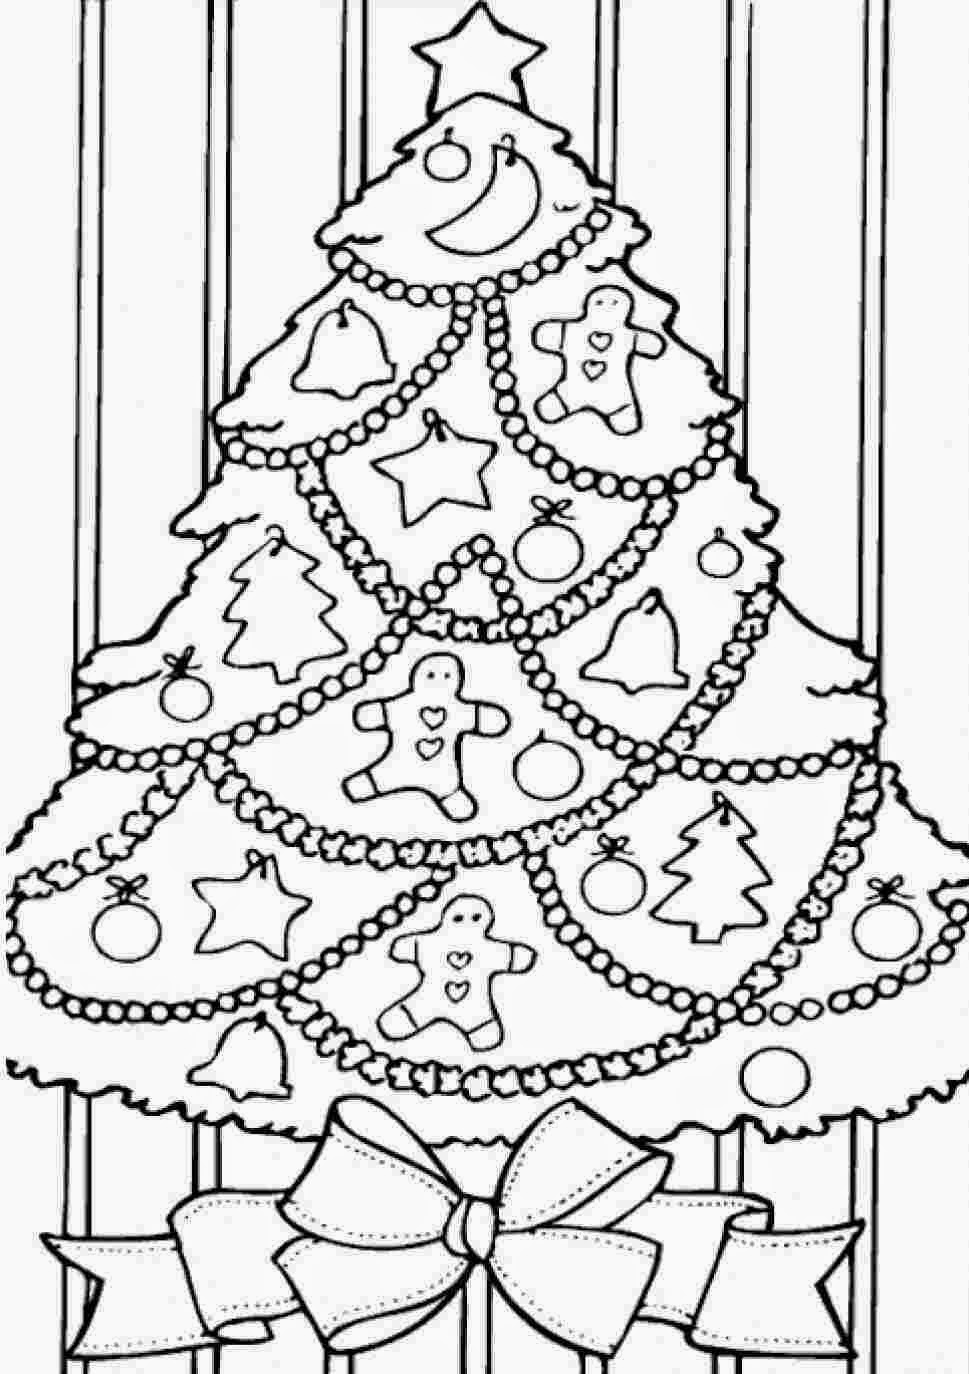 Beautiful Christmas Tree And kids Colour Drawing HD Wallpaper